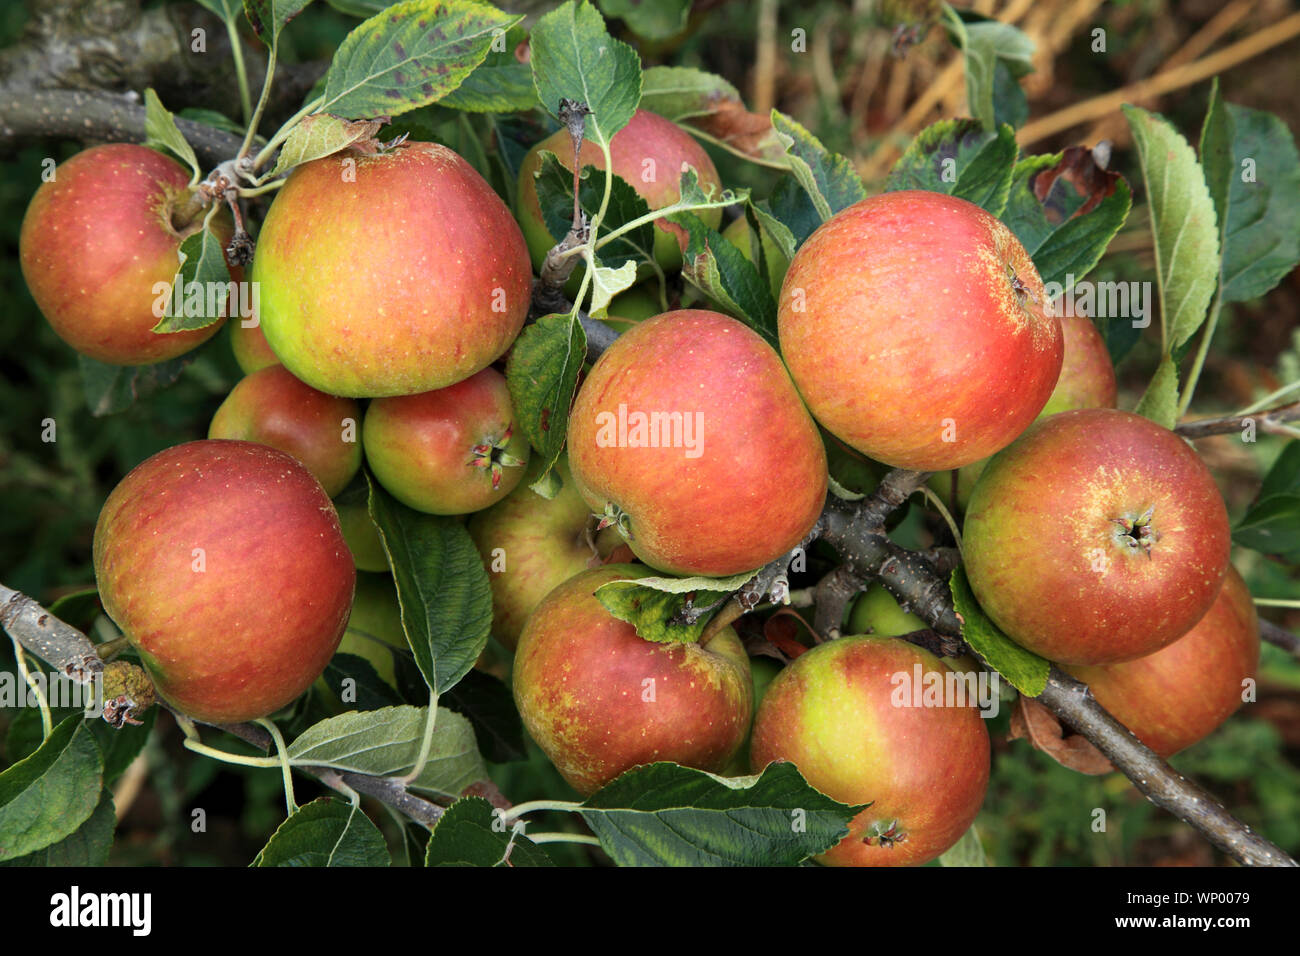 Apple, 'Cox's Orange Pippin', apples, growing on tree, named variety Stock Photo